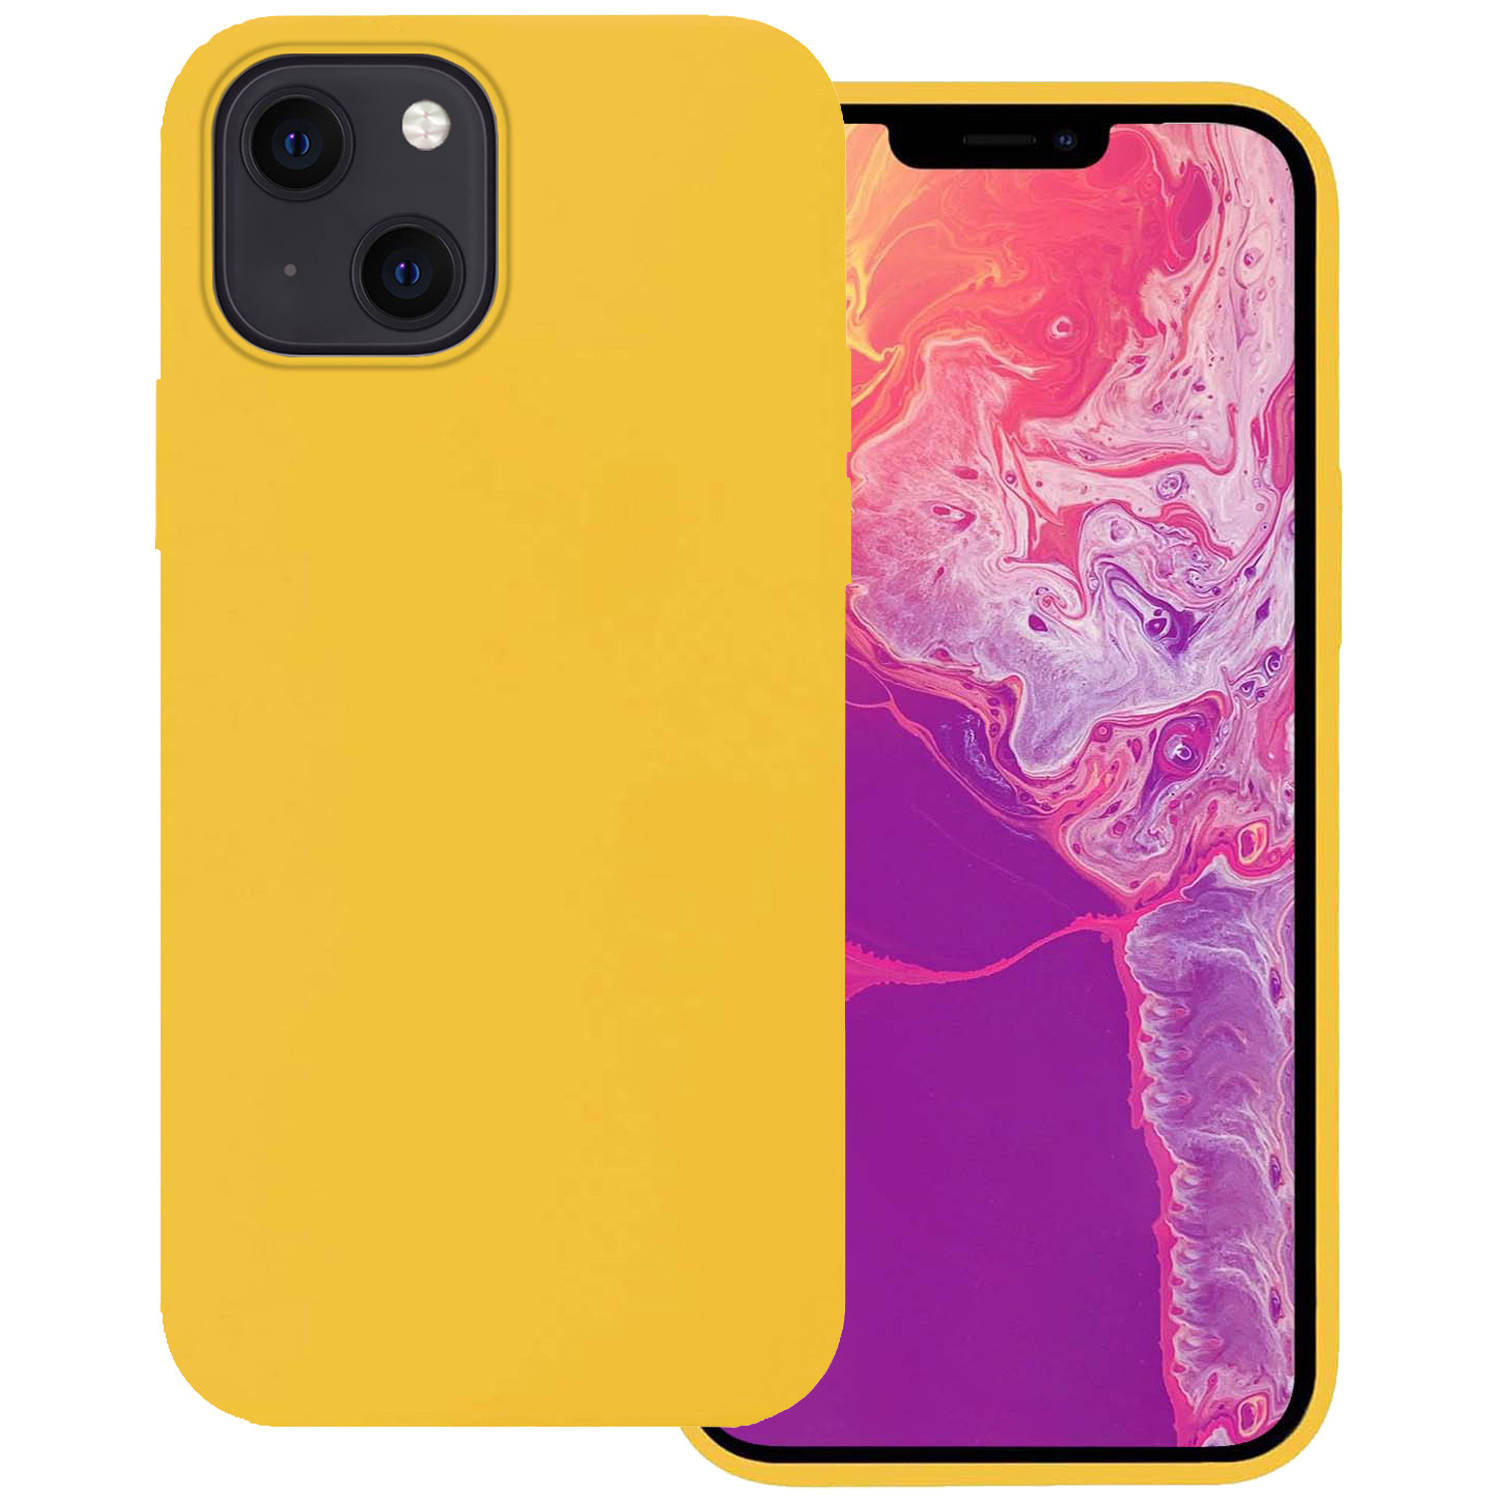 Basey iPhone 13 Mini Hoesje Silicone Case iPhone 13 Mini Case Geel Siliconen Hoes iPhone 13 Mini Hoe